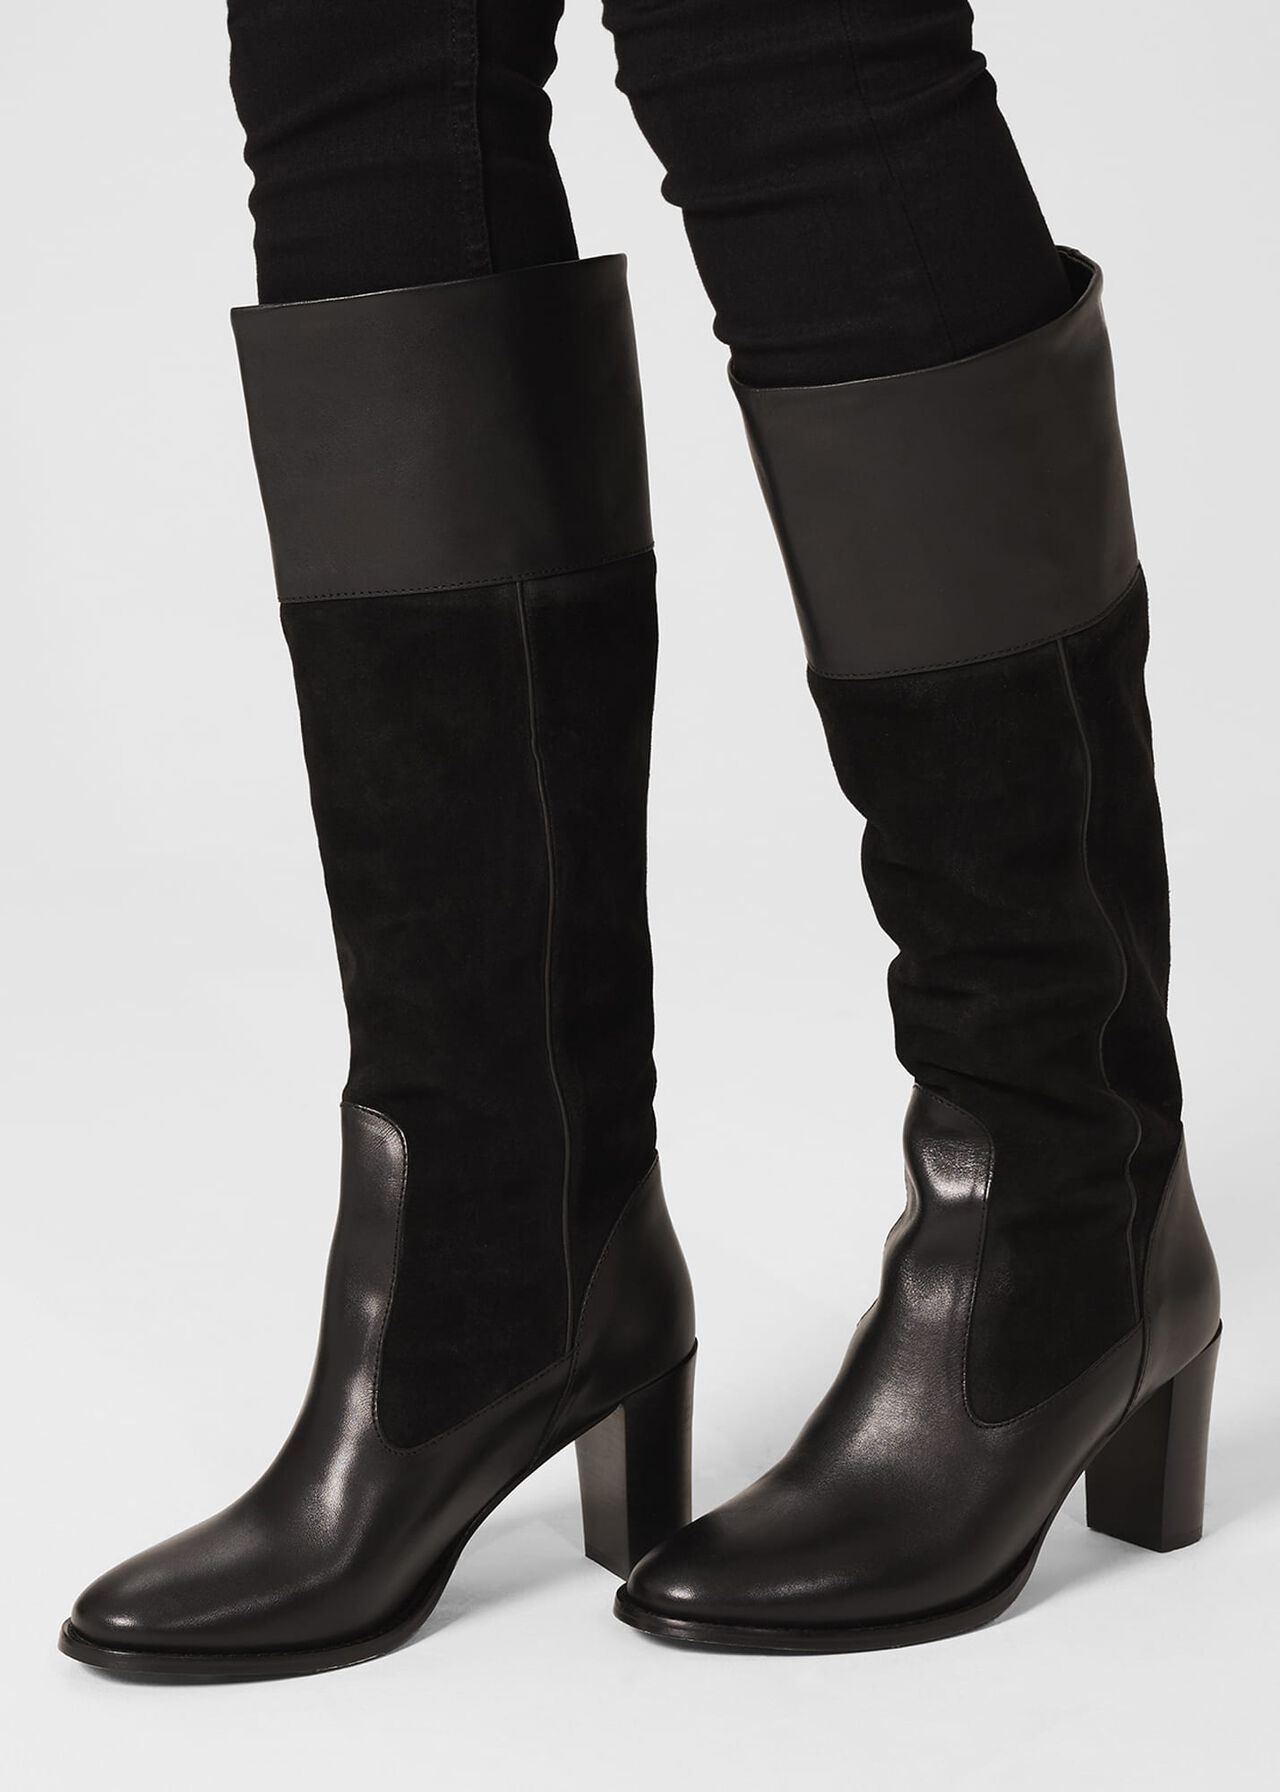 Stephanie Leather Knee Boots, Black, hi-res